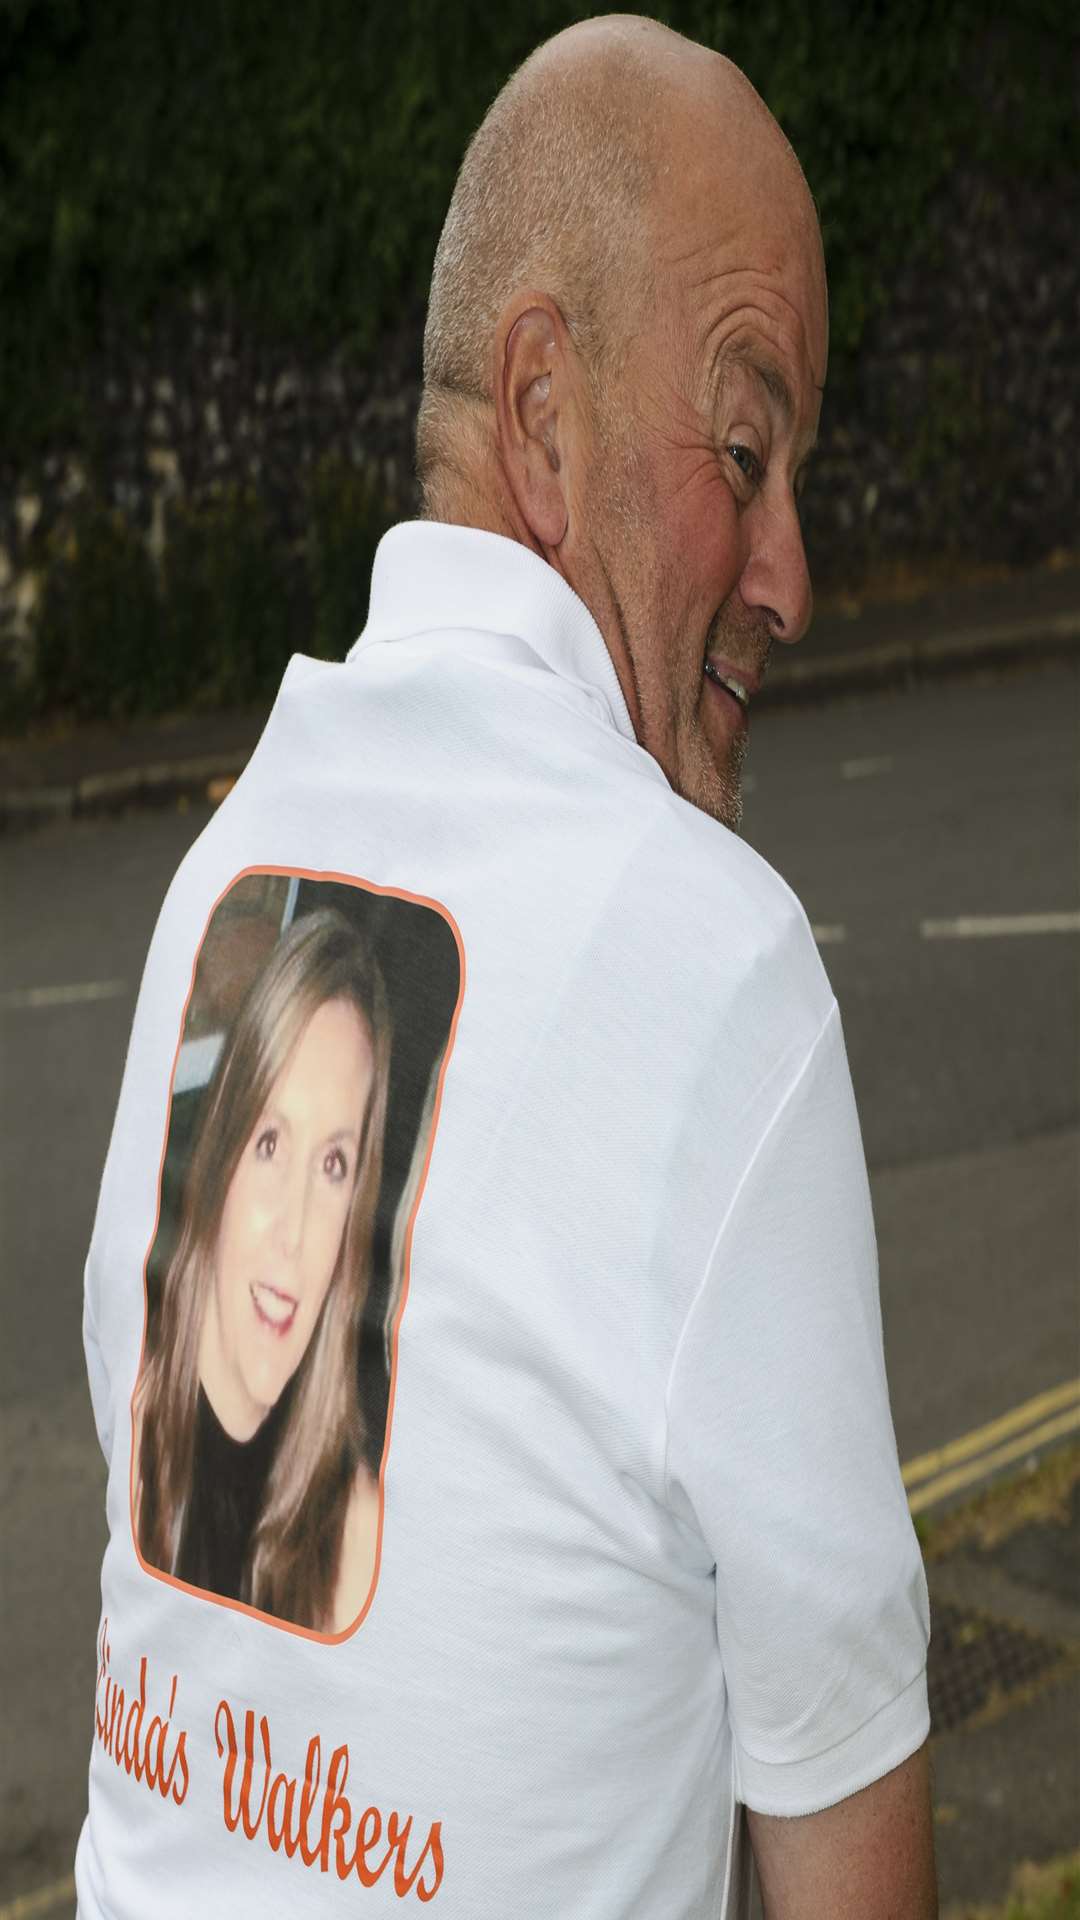 Trevor in a shirt dedicated to late wife Linda and hospice ellenor for the walk